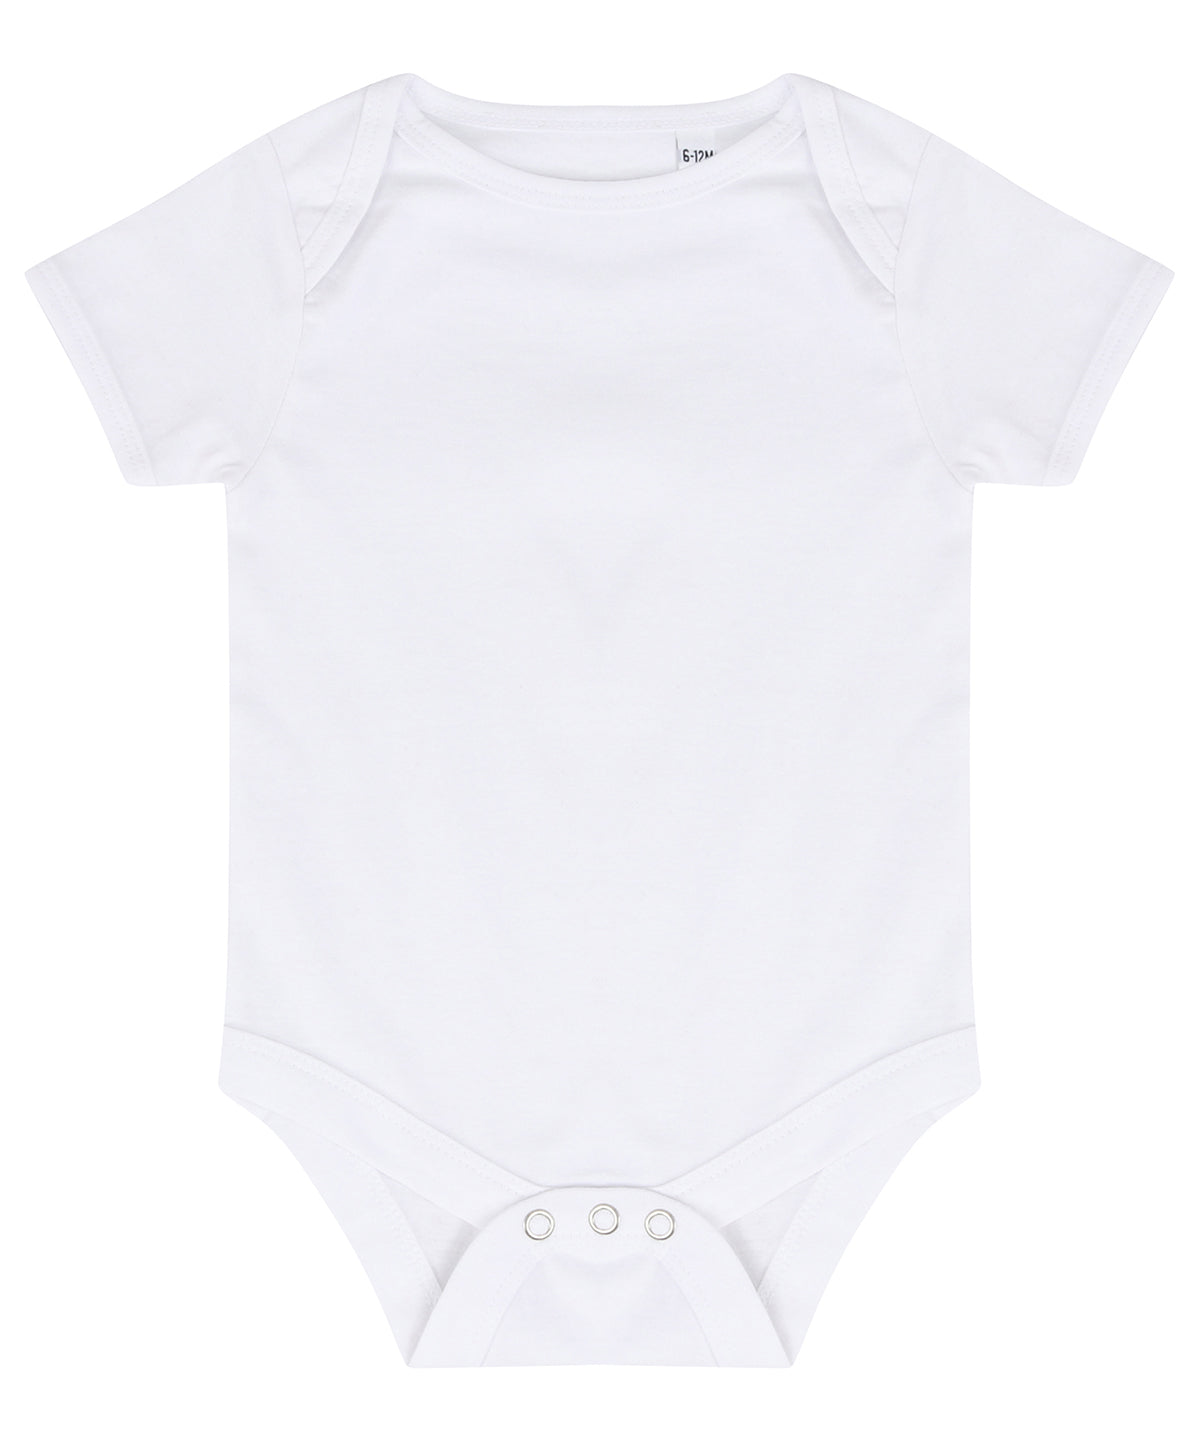 White Baby Vest with Oh Baby design